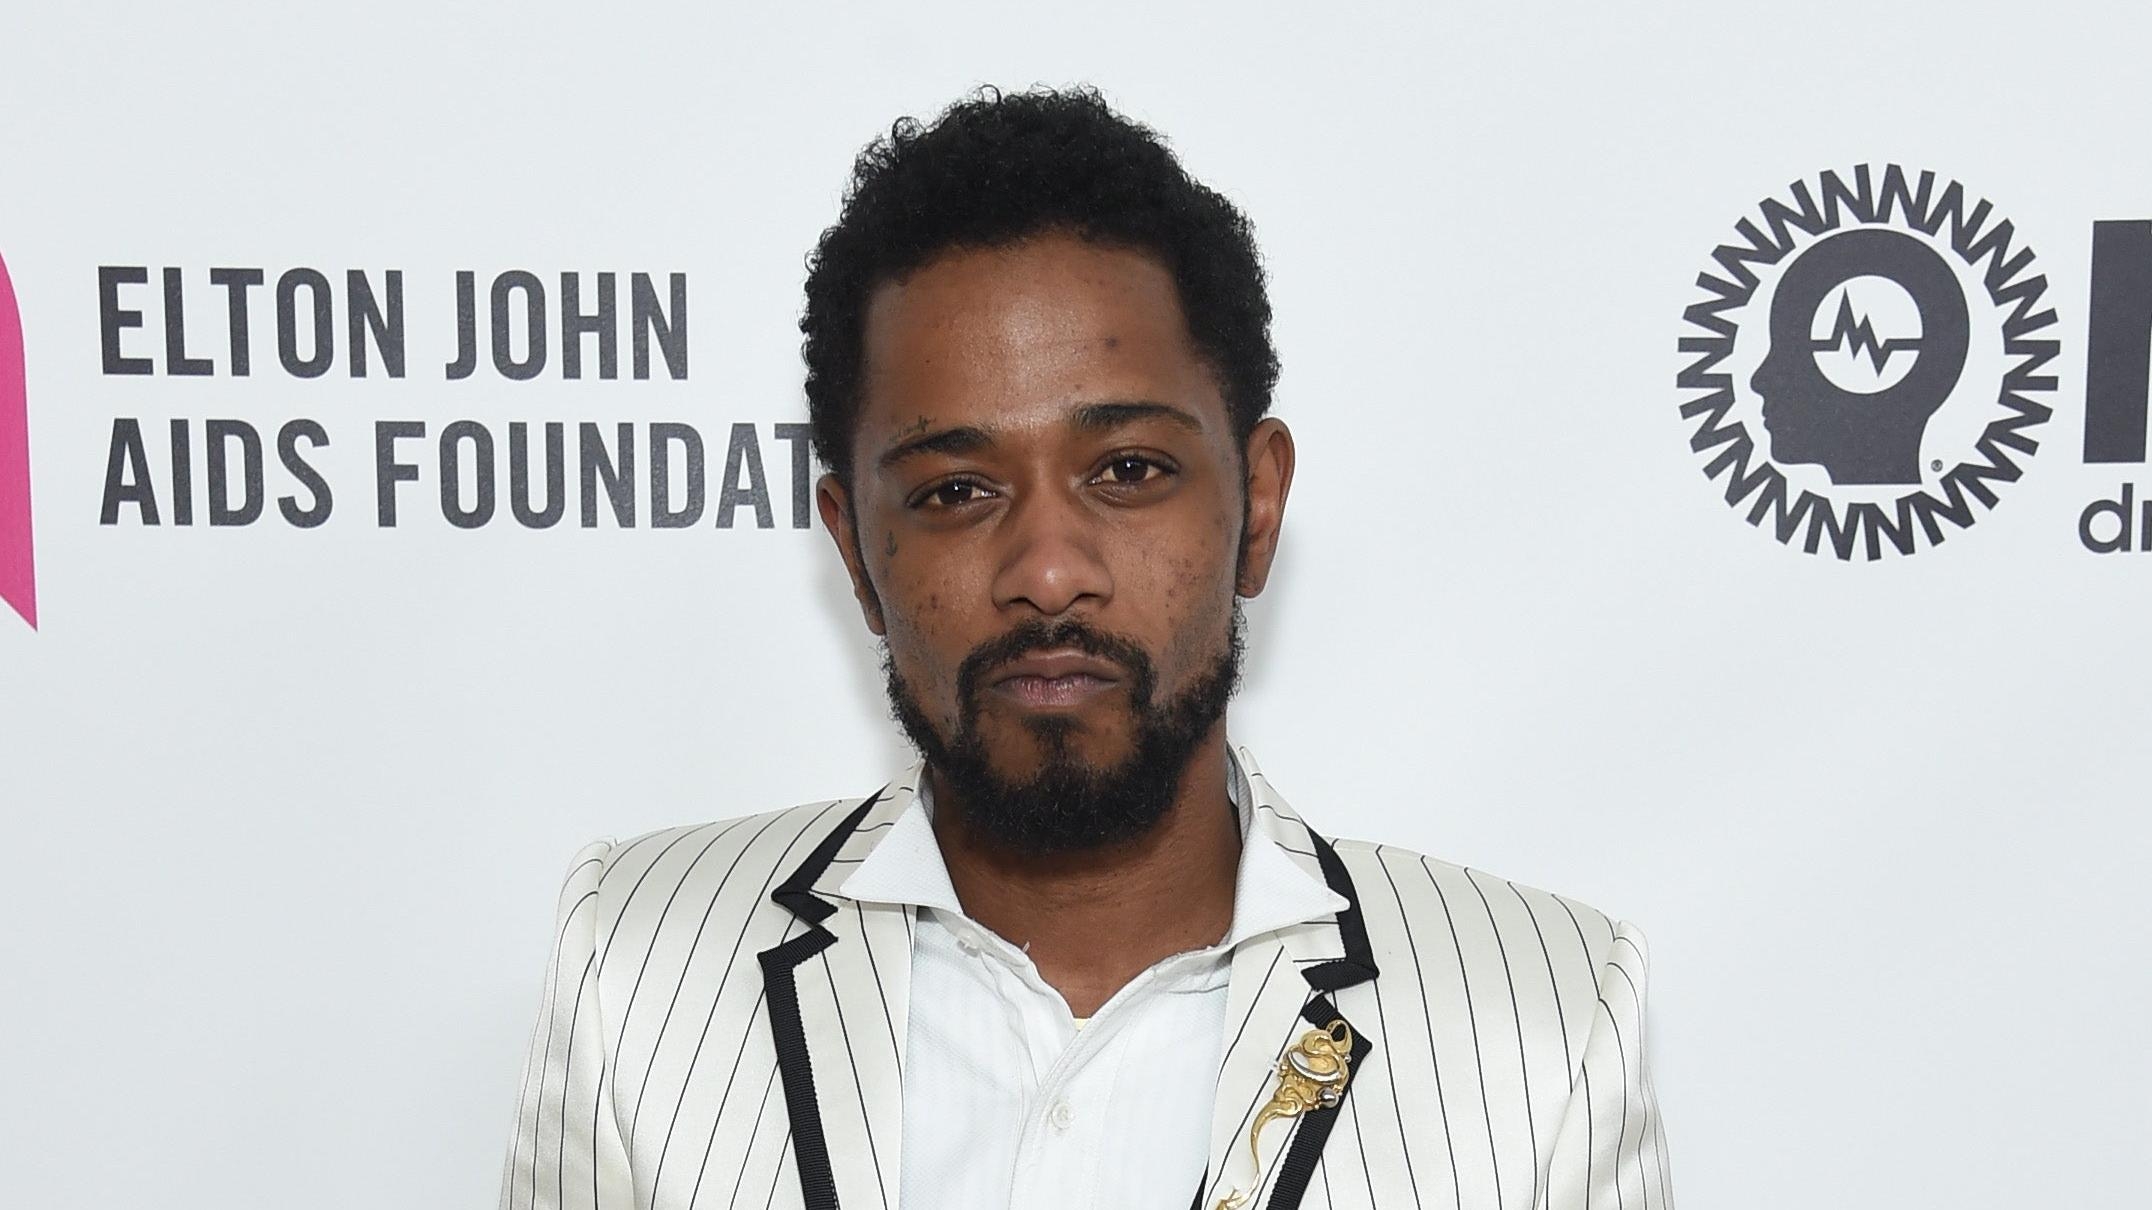 LaKeith Stanfield apologizes for participating in Clubhouse room broadcasting anti-Semitic speech